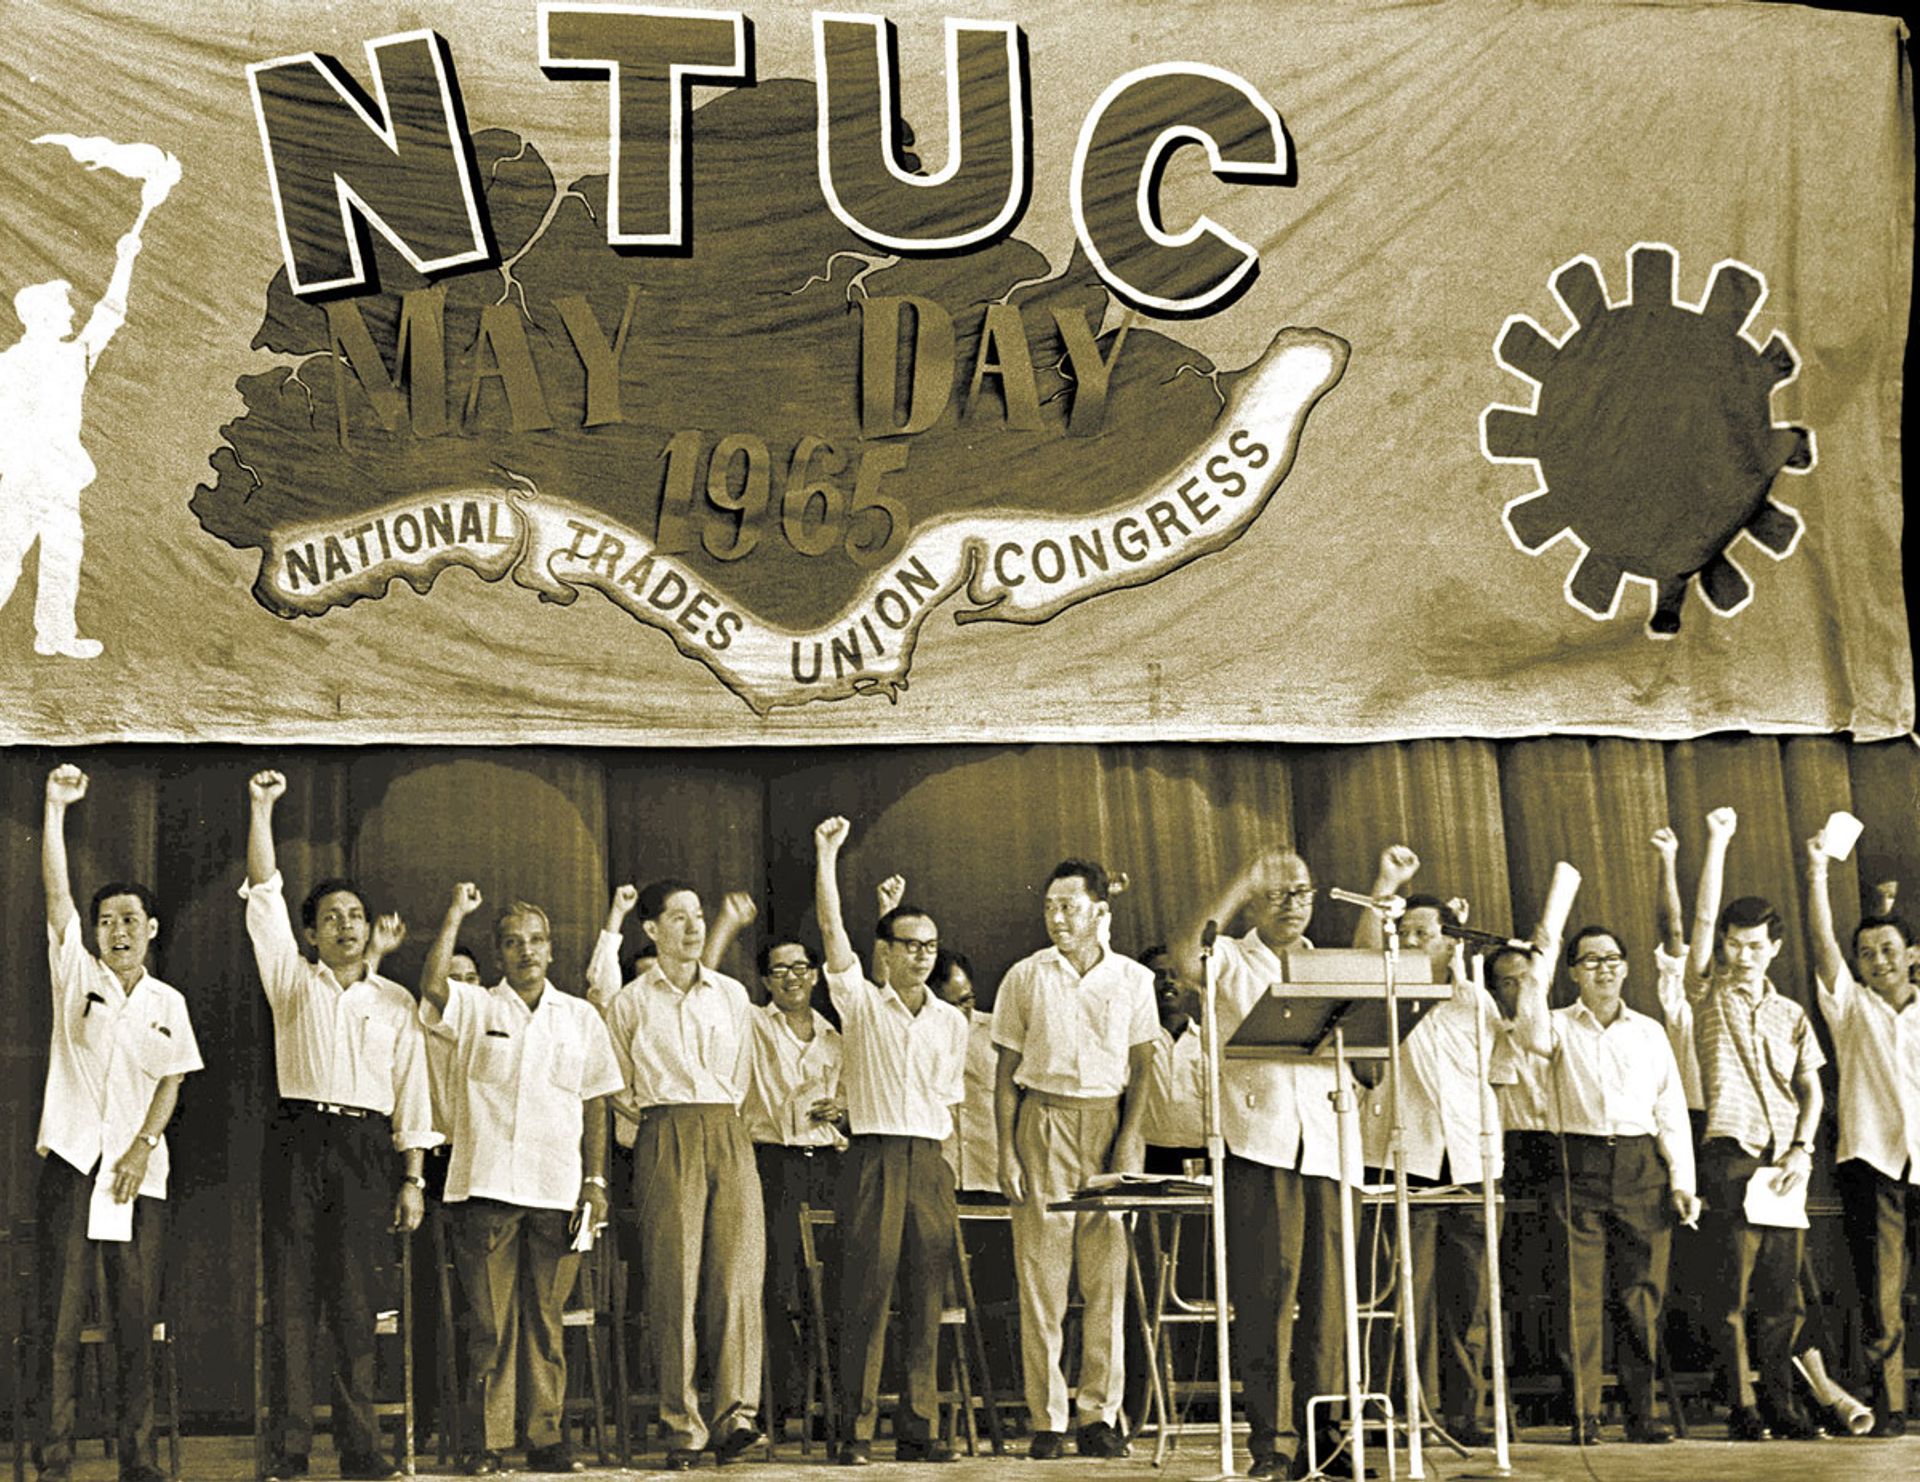 The trade union movement was a key partner to the Government in the economic development of Singapore. The National Trades Union Congress played a leading role in this, led by its founding leader, Mr C.V. Devan Nair, seen here on stage with Mr Lee (left of Mr Nair) at the NTUC May Day Rally in 1965. Source: Lee Kuan Yew